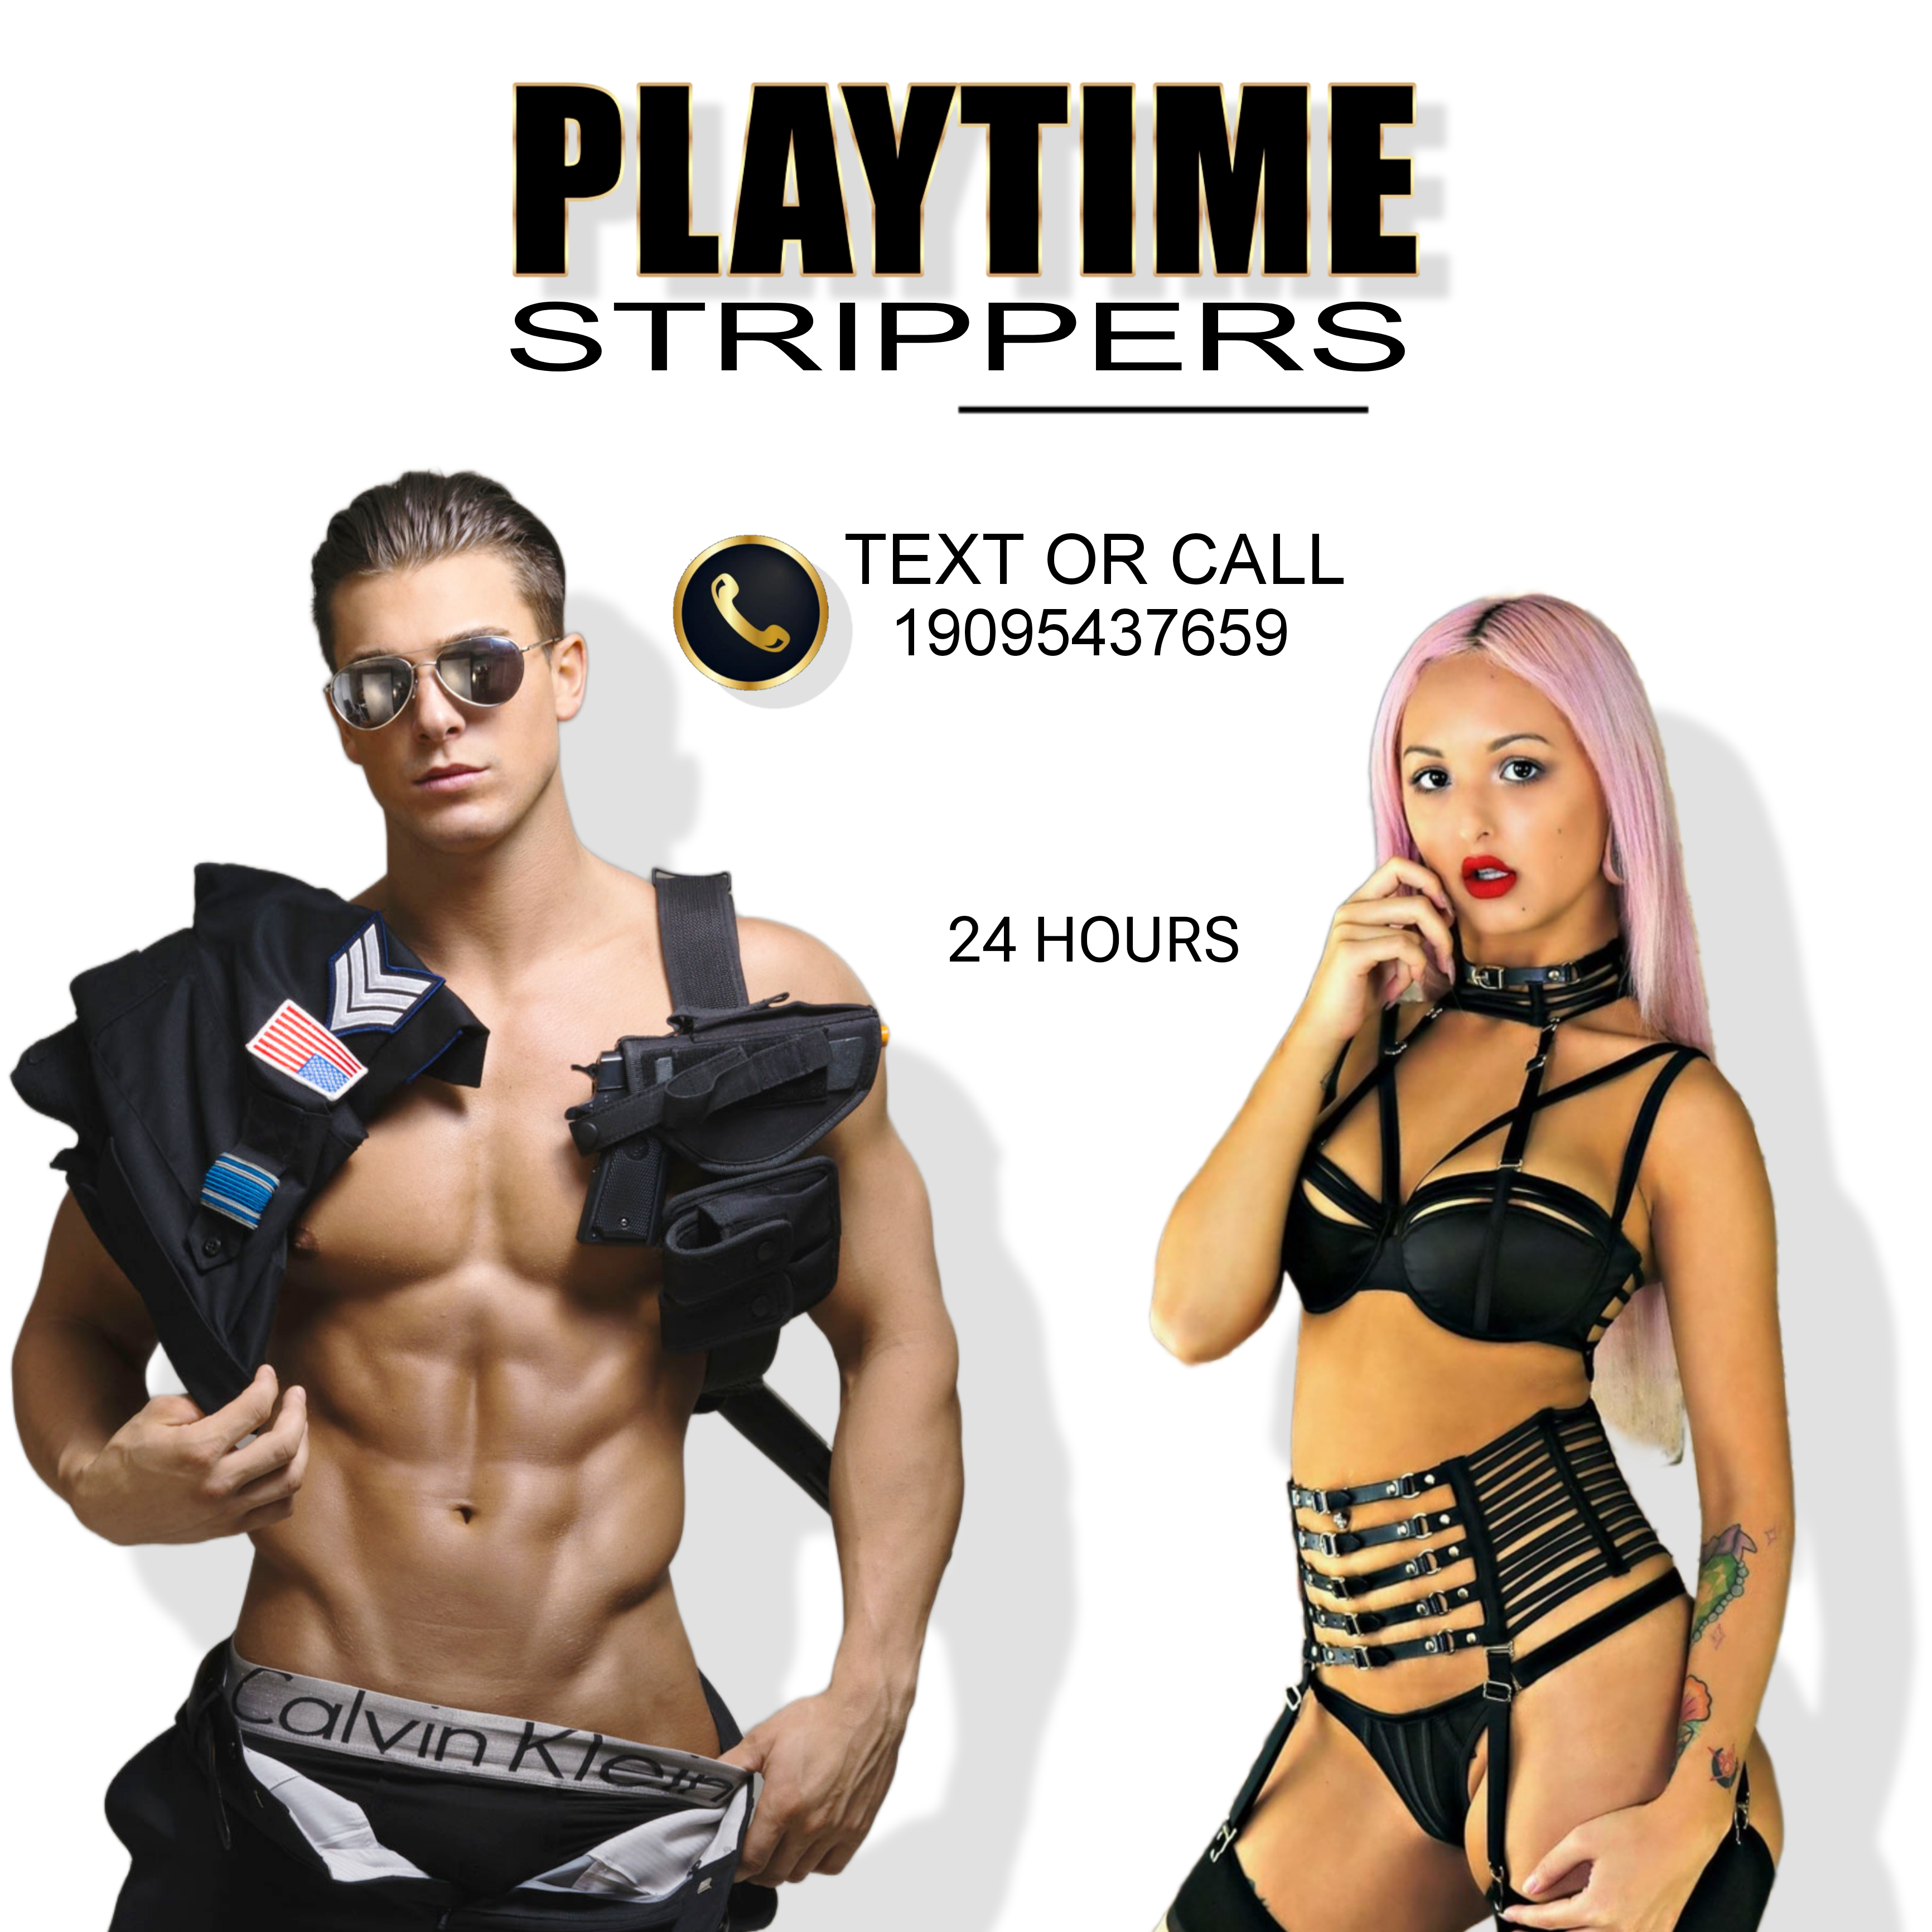 PLAYTIME STRIPPERS